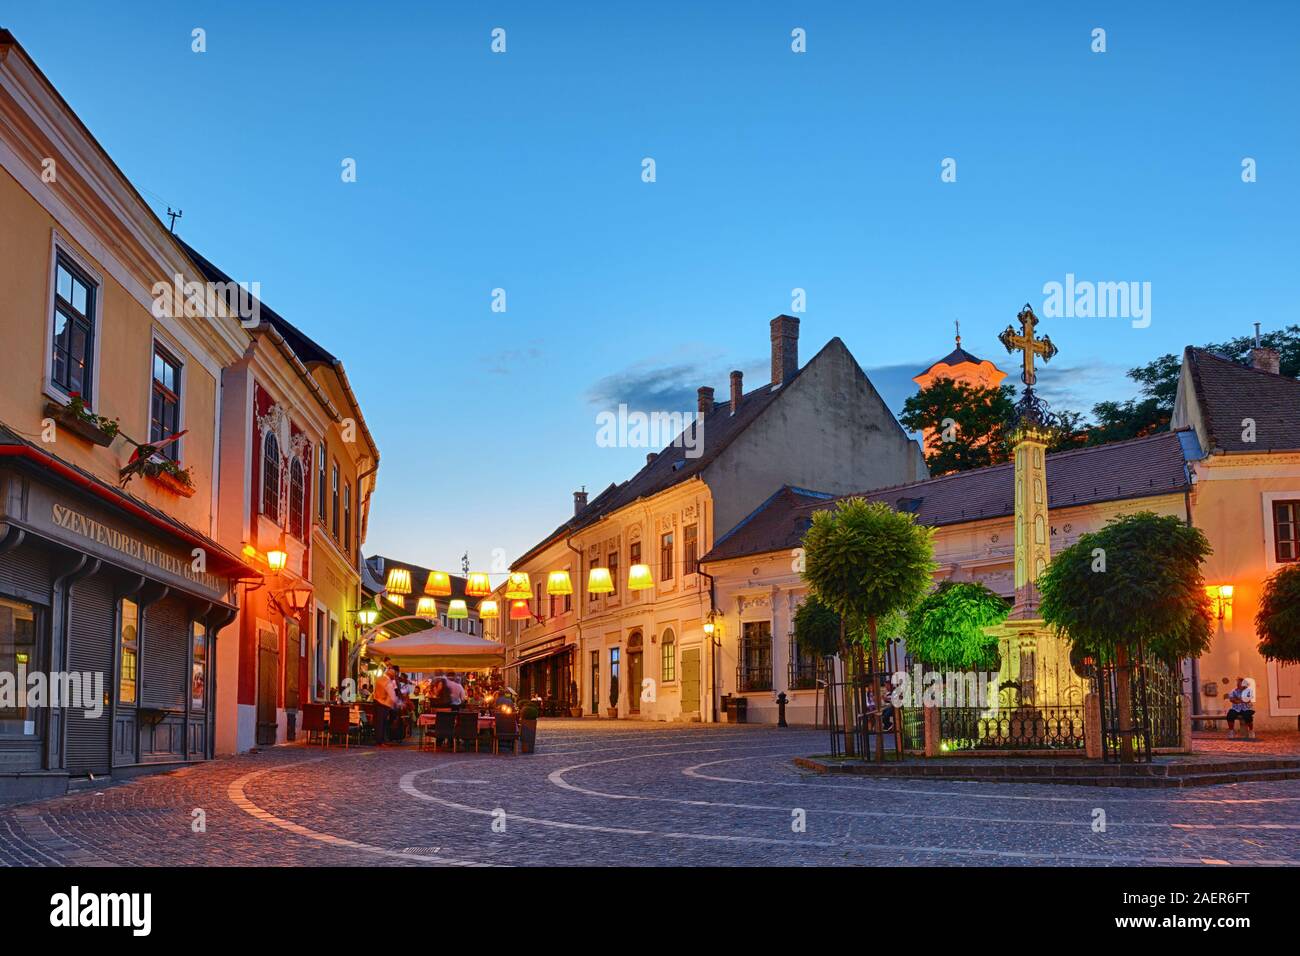 Illuminated old town main square in Szentendre, Hungary Stock Photo